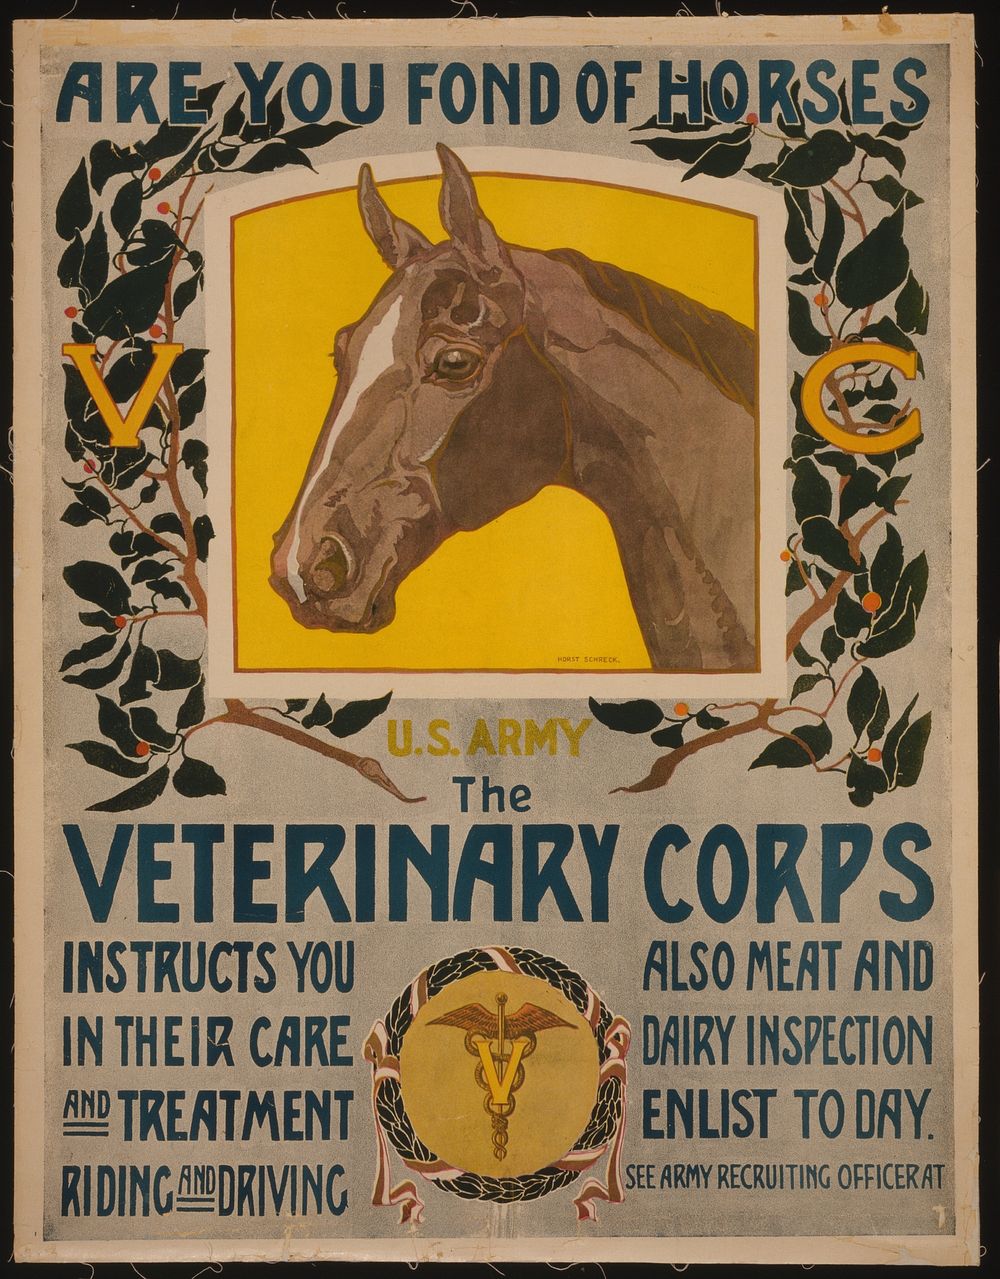 Are you fond of horses - U.S. Army - The Veterinary Corps instructs you in their care and treatment, riding and driving …